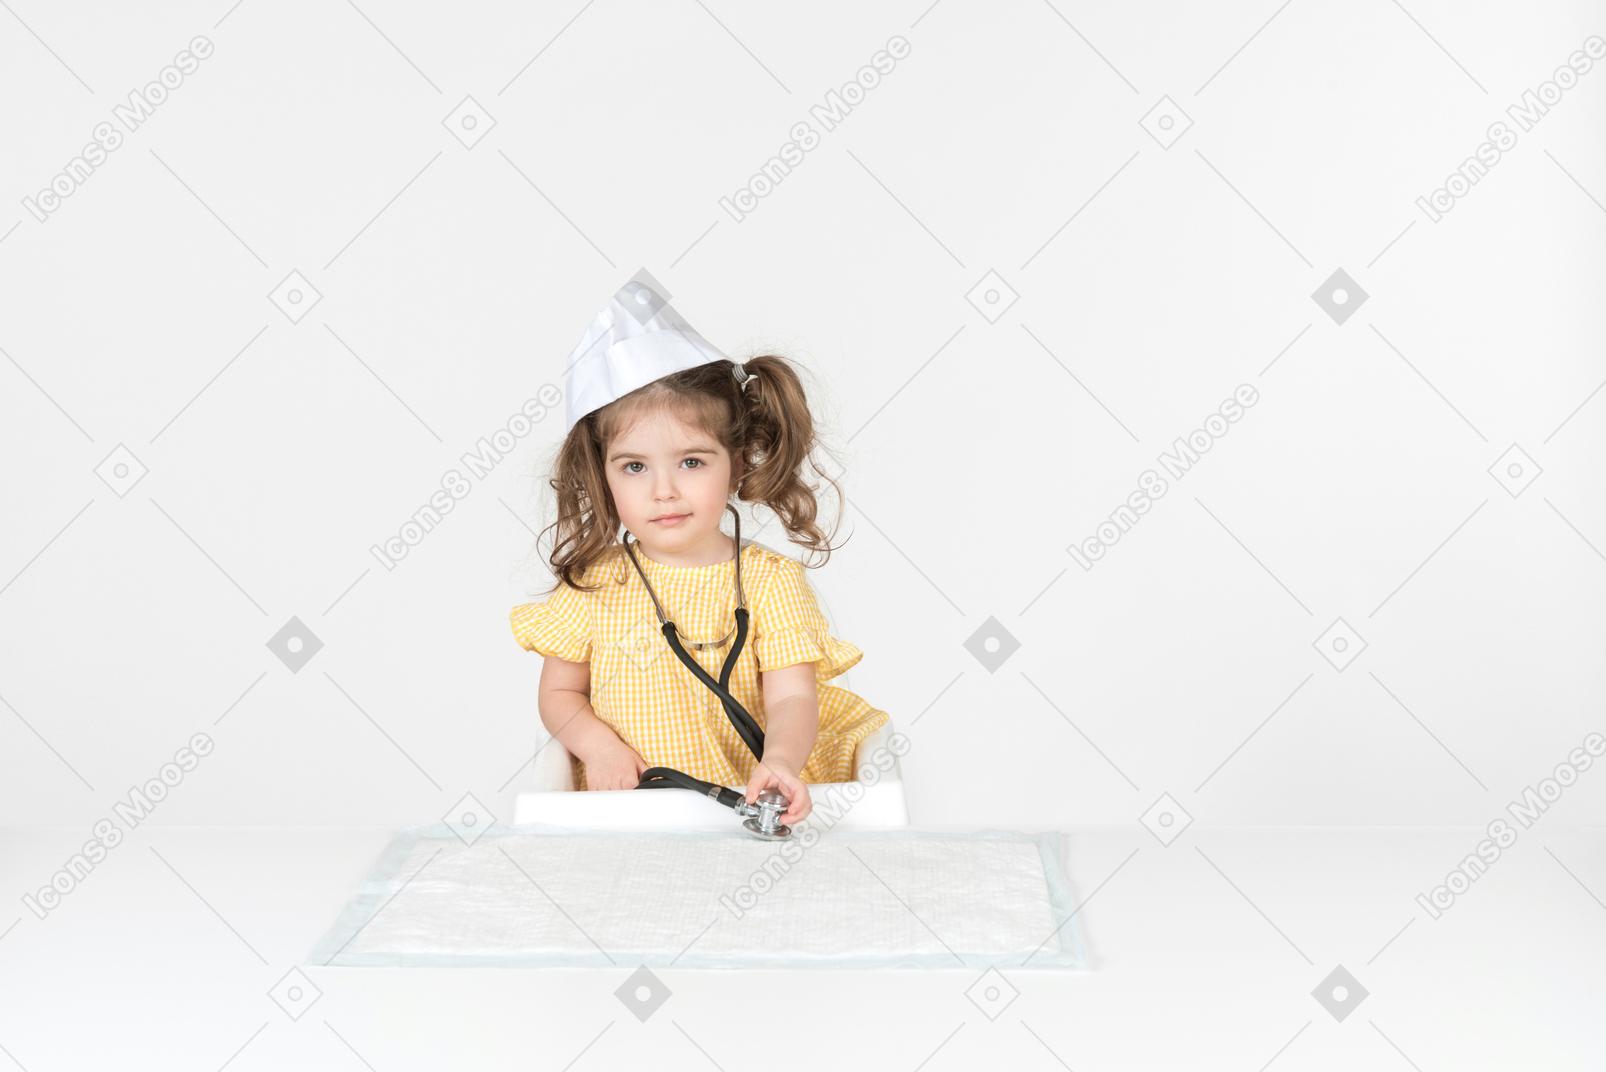 Little kid girl dressed as a doctor sitting at the table